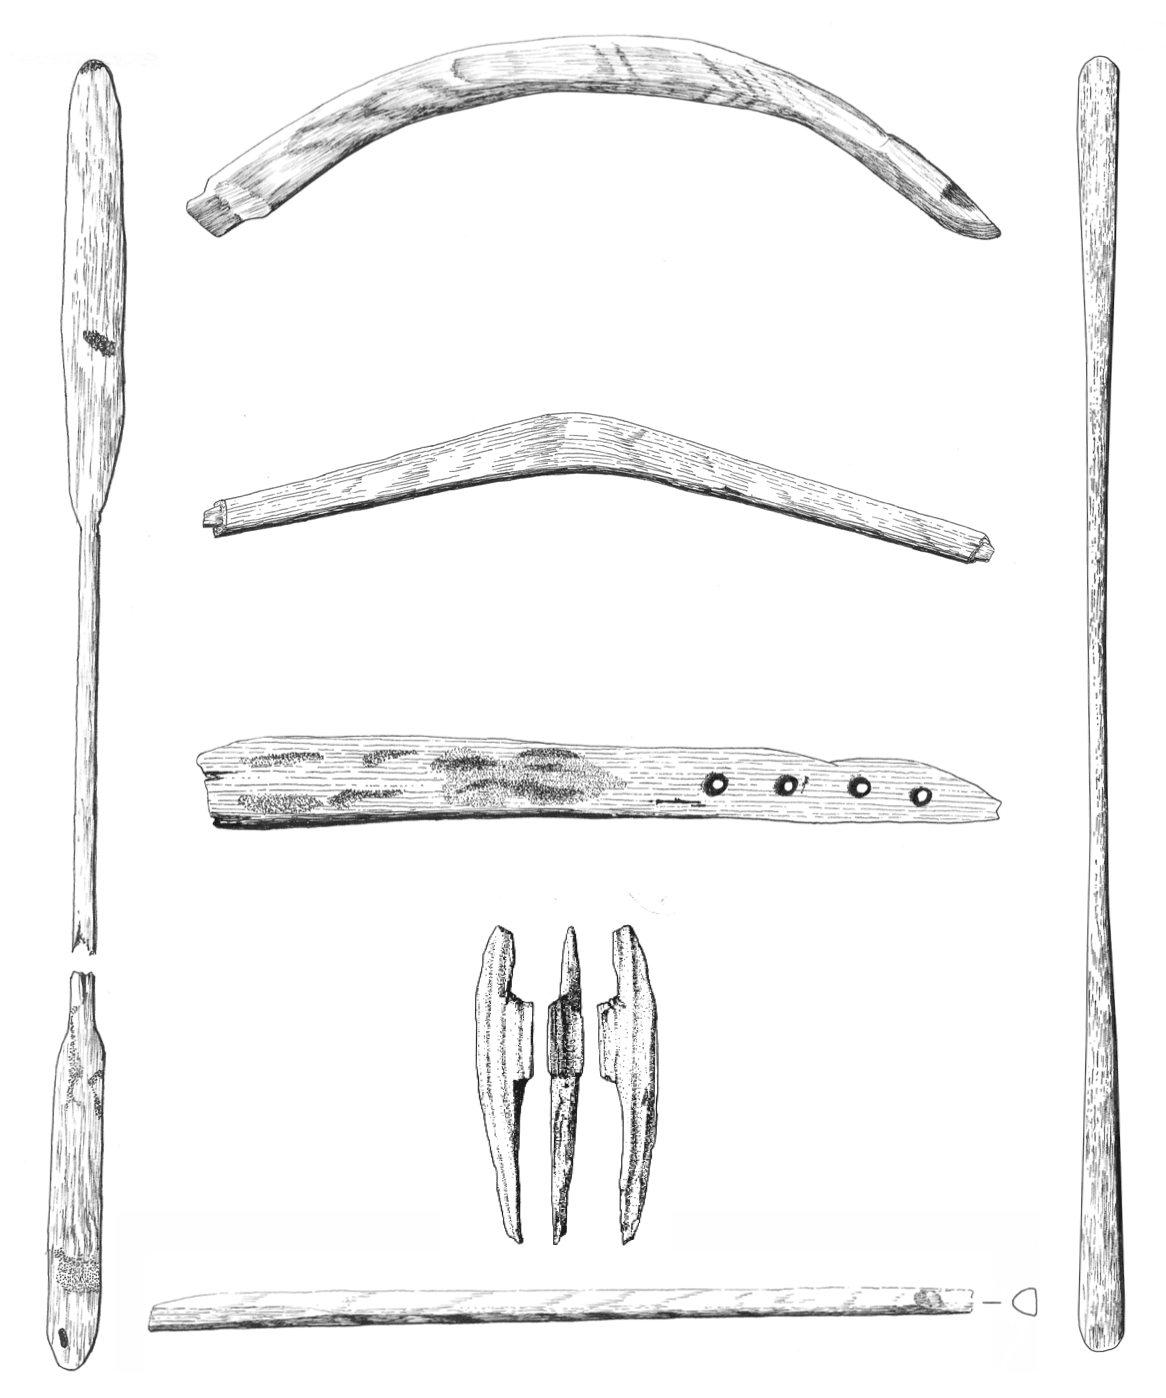 This drawing or image or illustration or depiction shows parts of kayaks though not at scale. Their are paddles, stringers and a deck member.